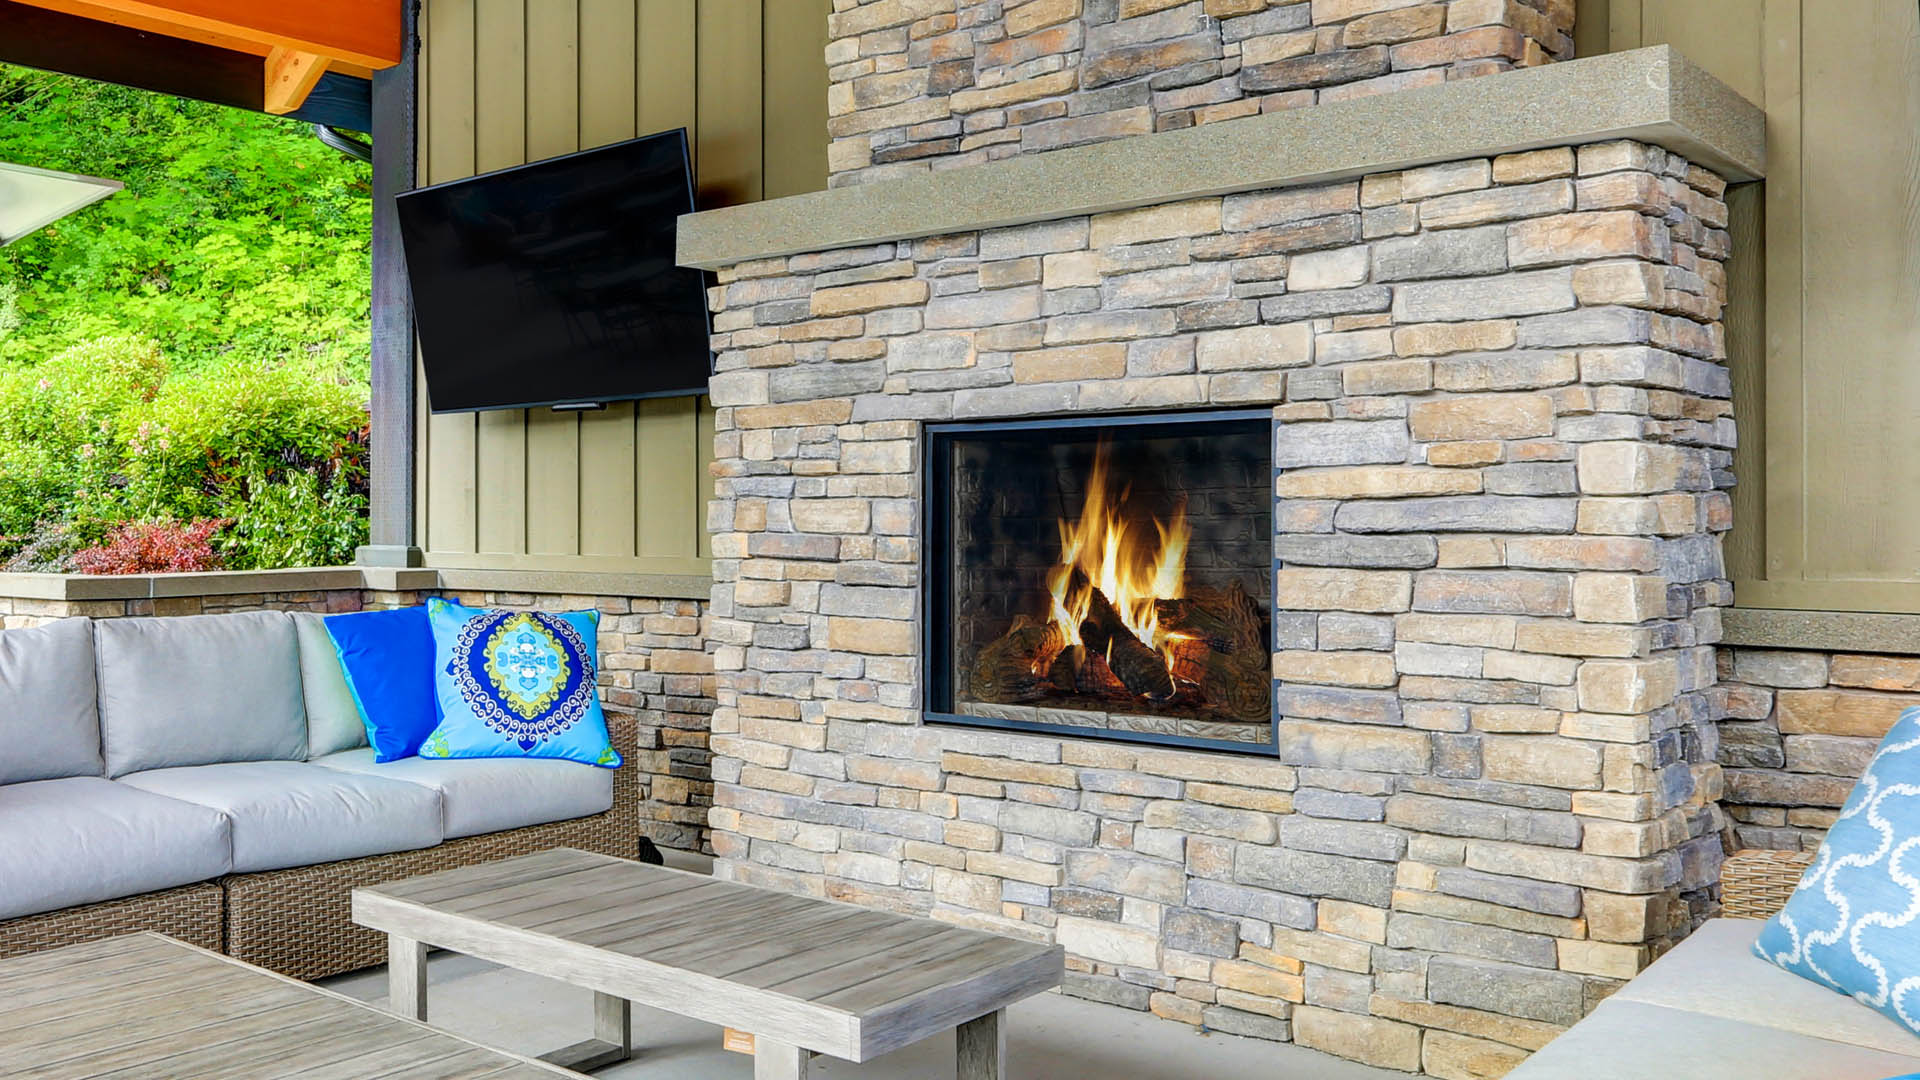 Outdoor fireplace and living areas.